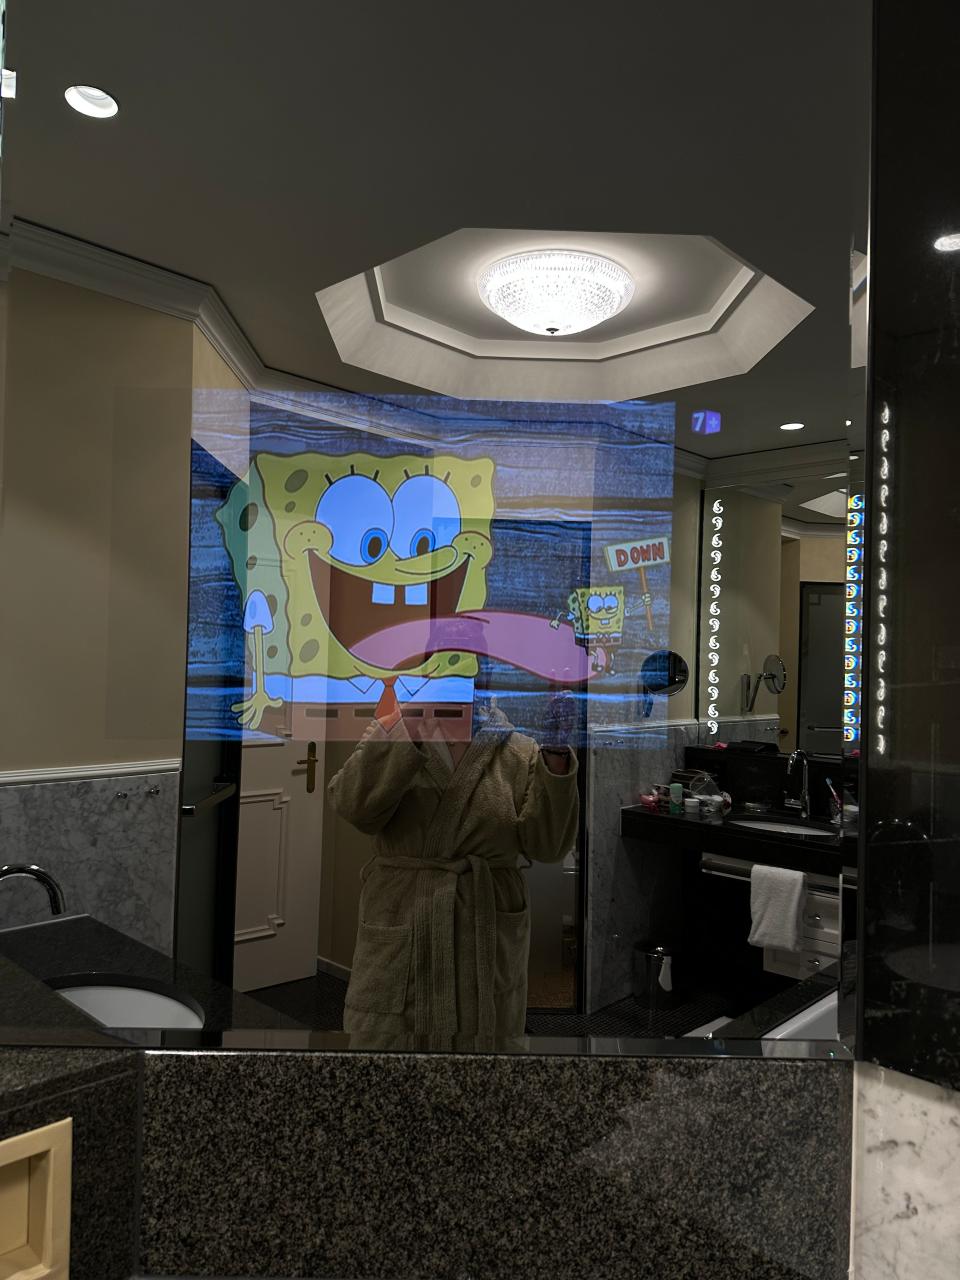 A tv within a mirror, with spongebob playing